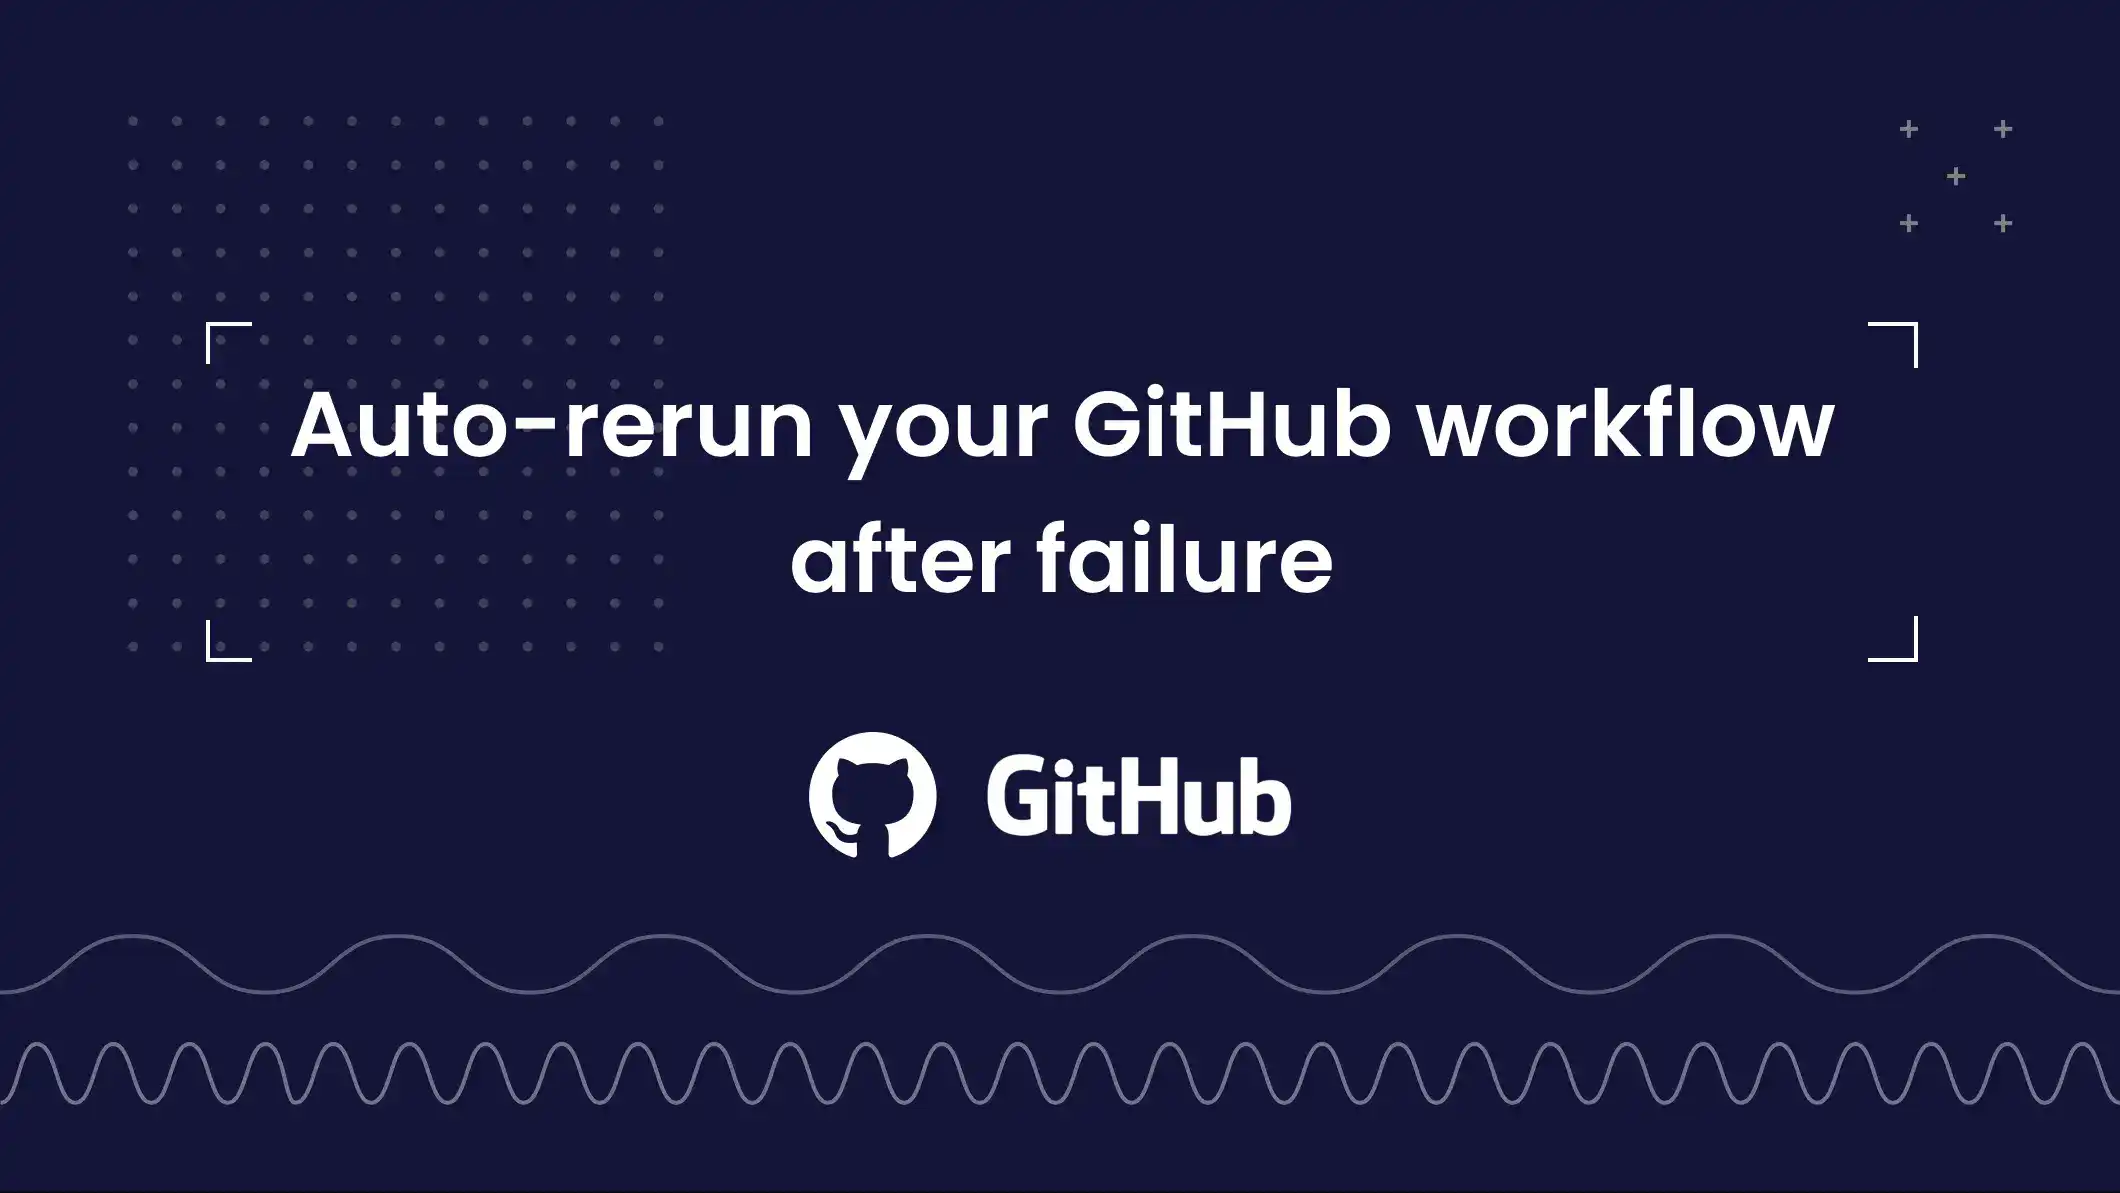 Automatically rerun your GitHub workflow after failure